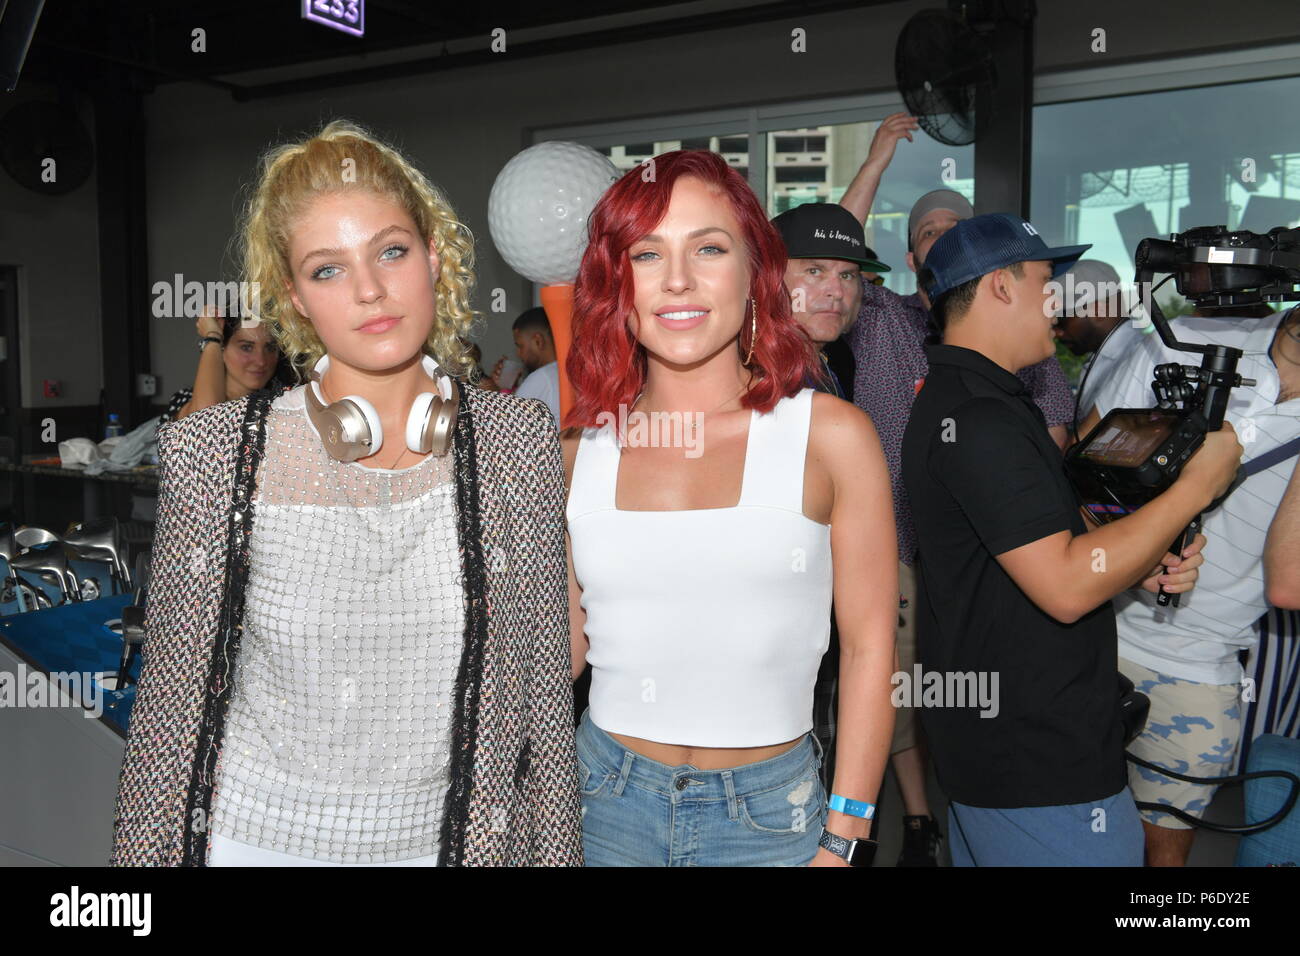 MIAMI GARDENS, FL - JUNE 30: Lindsay Arnold, Sharna May Burgess at the Topgolf during Dj Irie Weekend 2018 on June 30, 2018 in Miami, Florida   People:  Lindsay Arnold, Sharna May Burgess Stock Photo